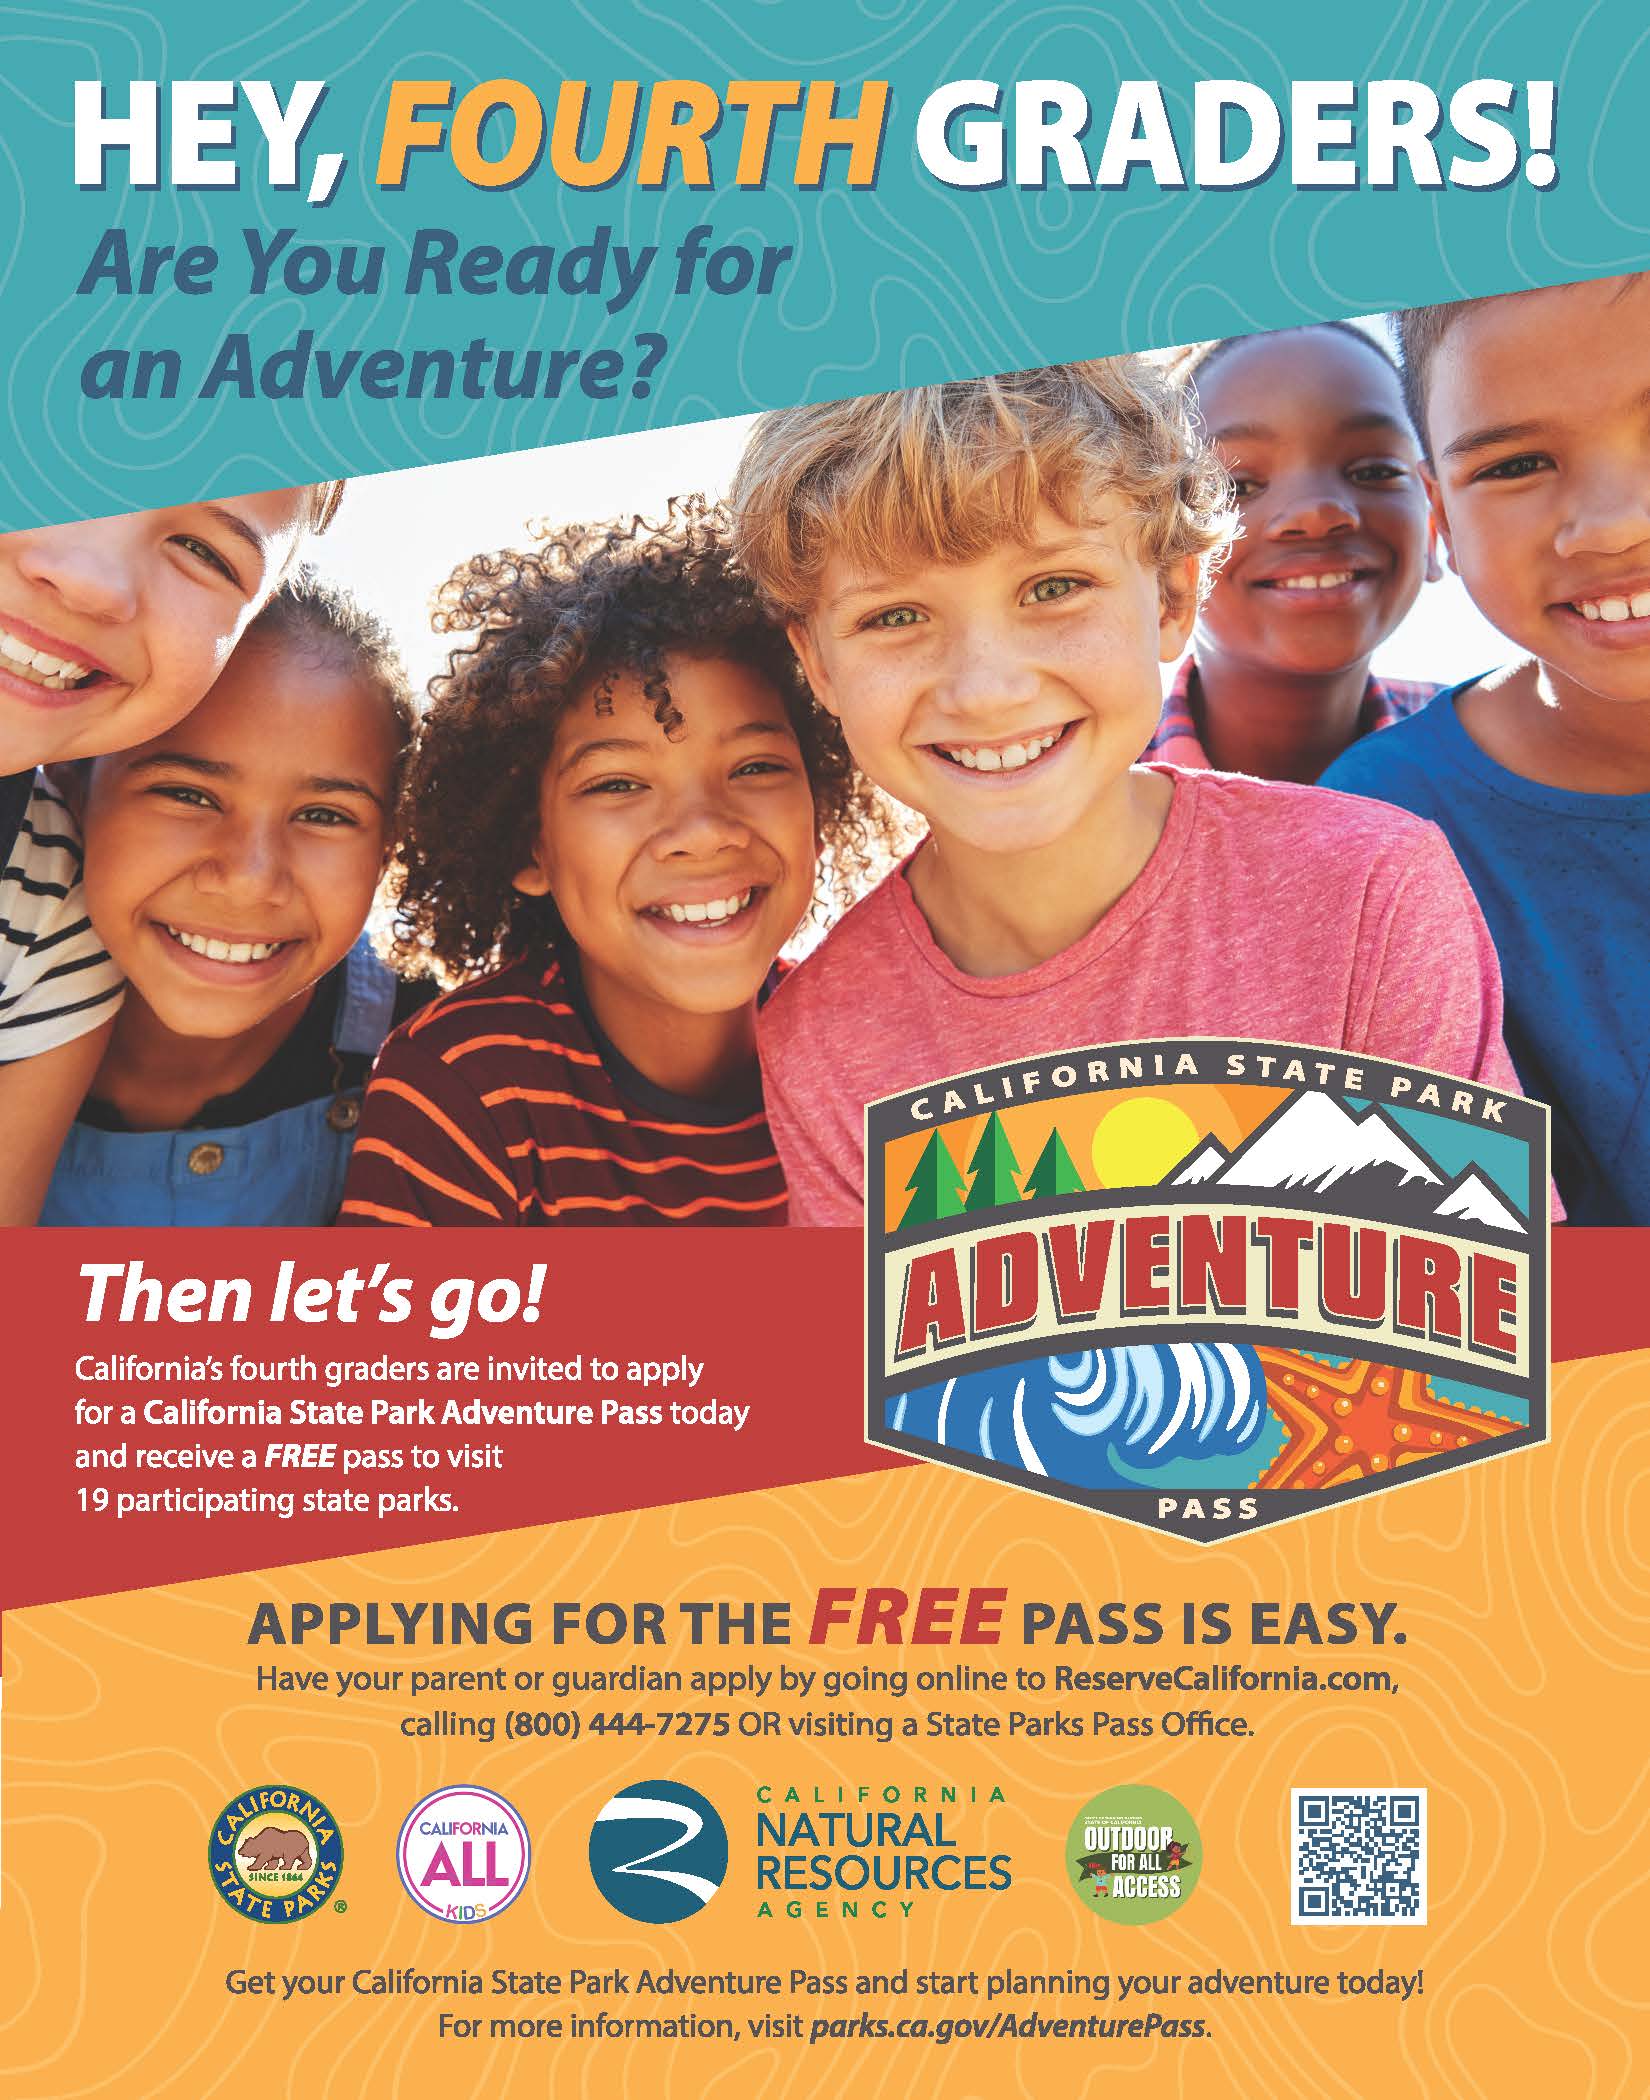 Hey 4th graders-Find out about the Adventure Pass